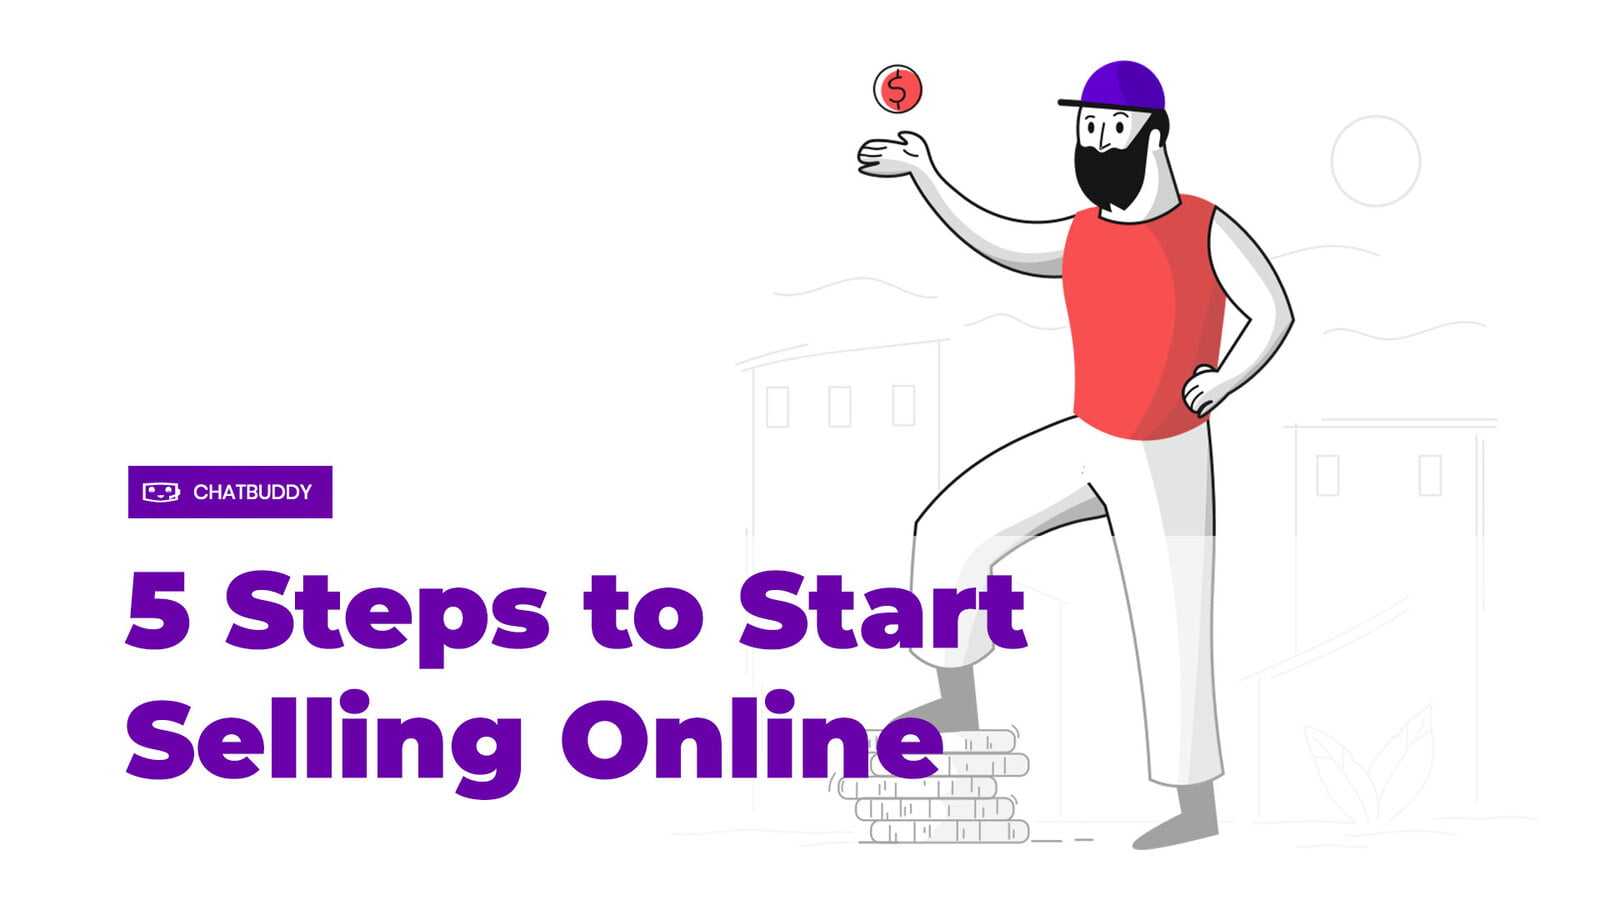 5 Steps to Start Selling Online